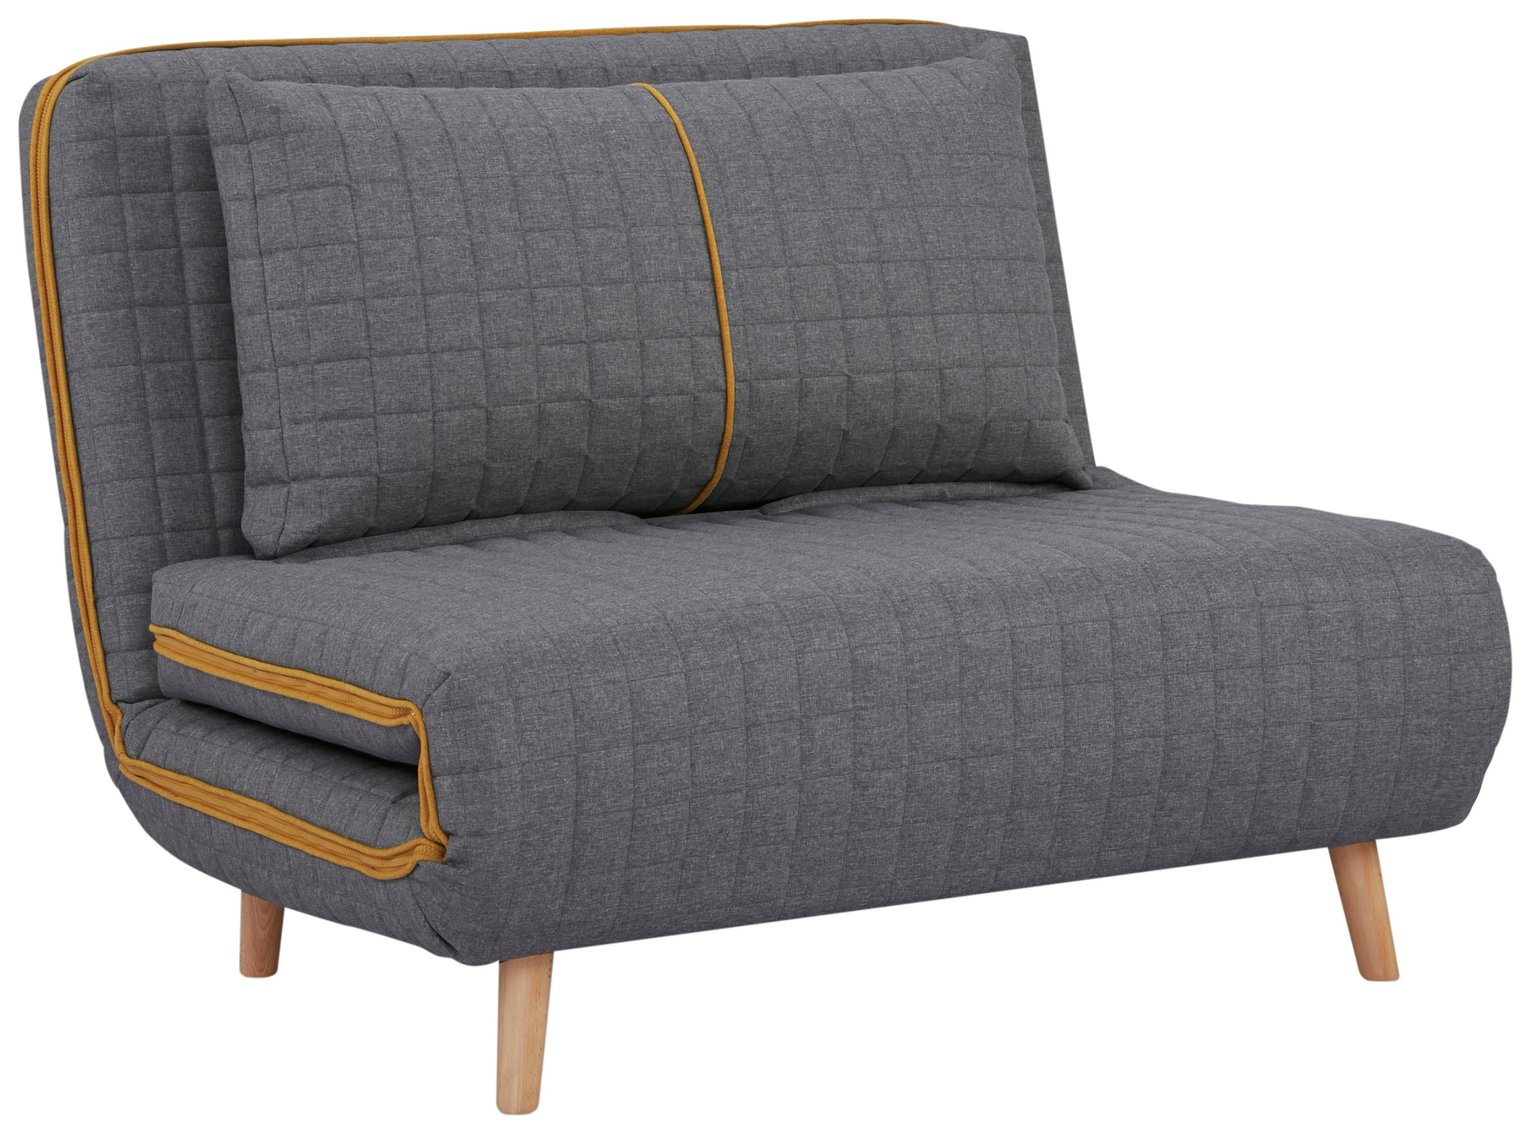 habitat roma small double quilted sofa bed - charcoal